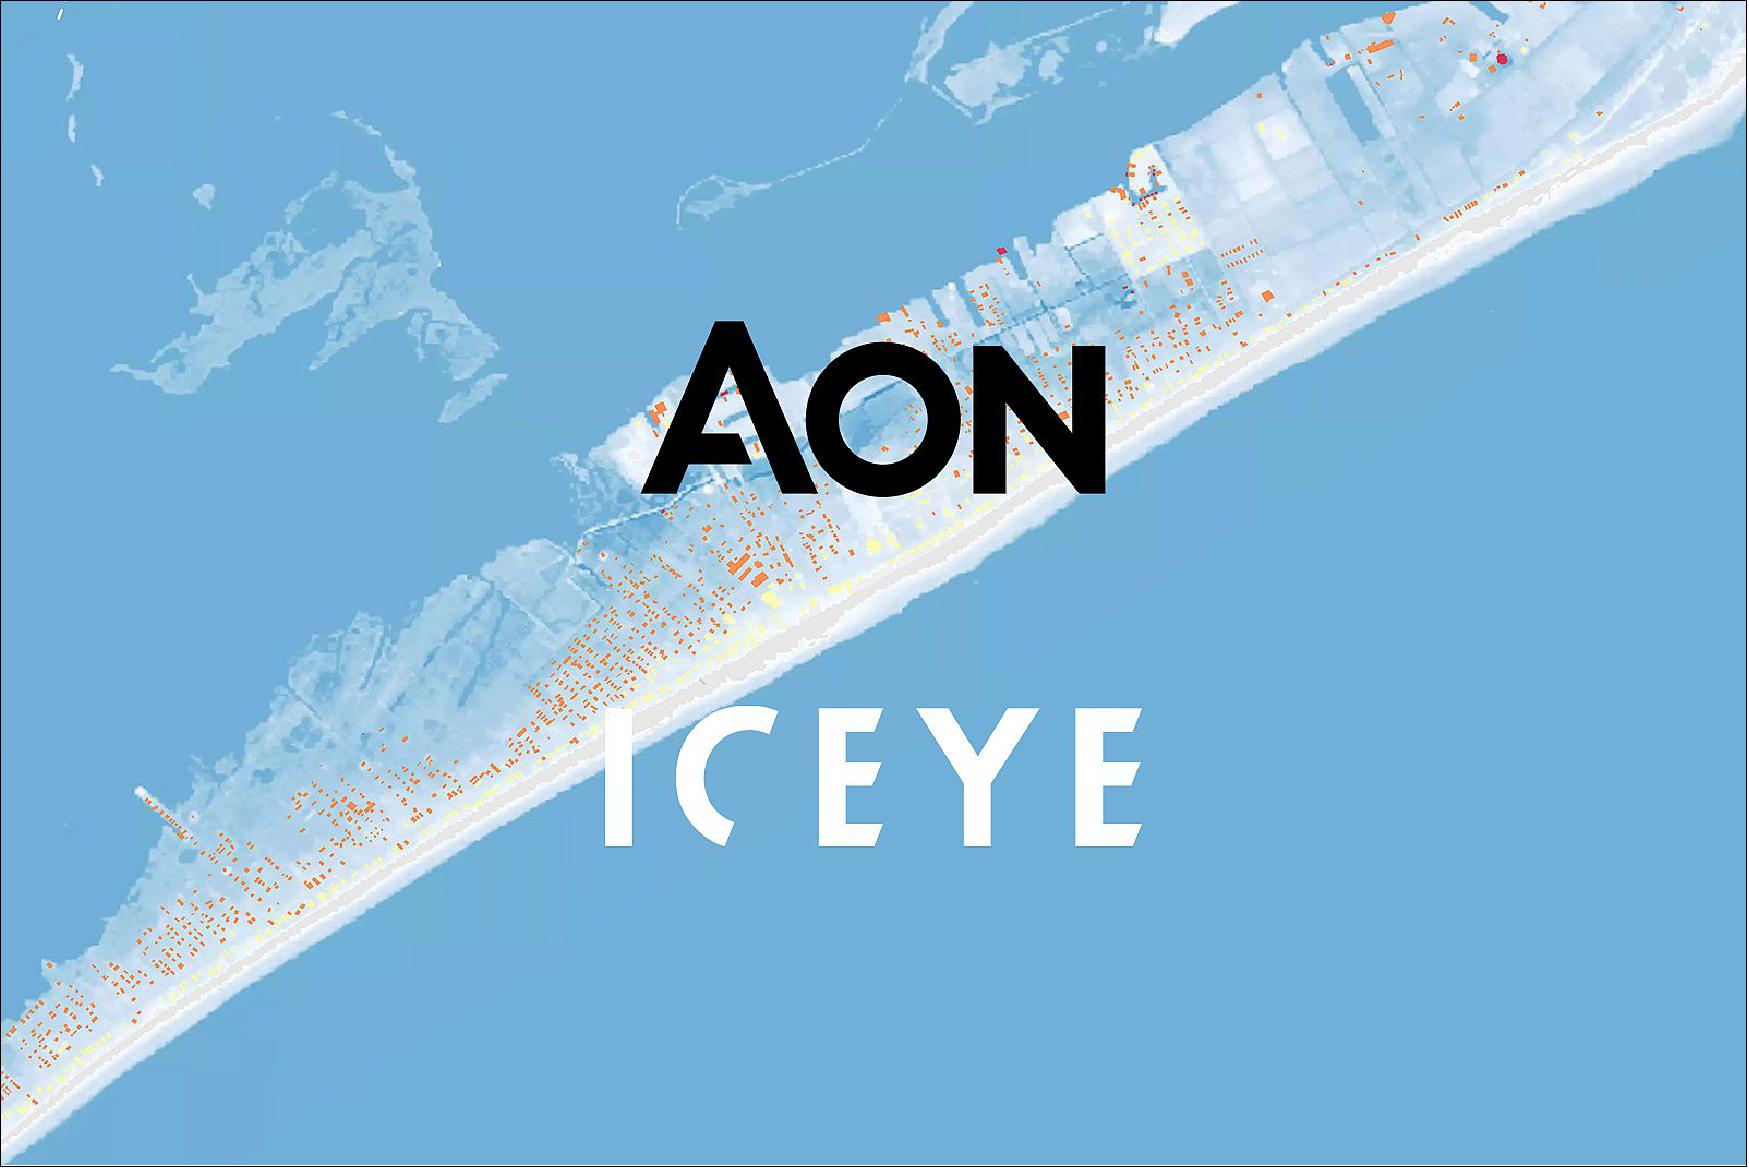 Figure 21: Aon plc and ICEYE logos with flood extent visualization in the background (image credit: ICEYE)